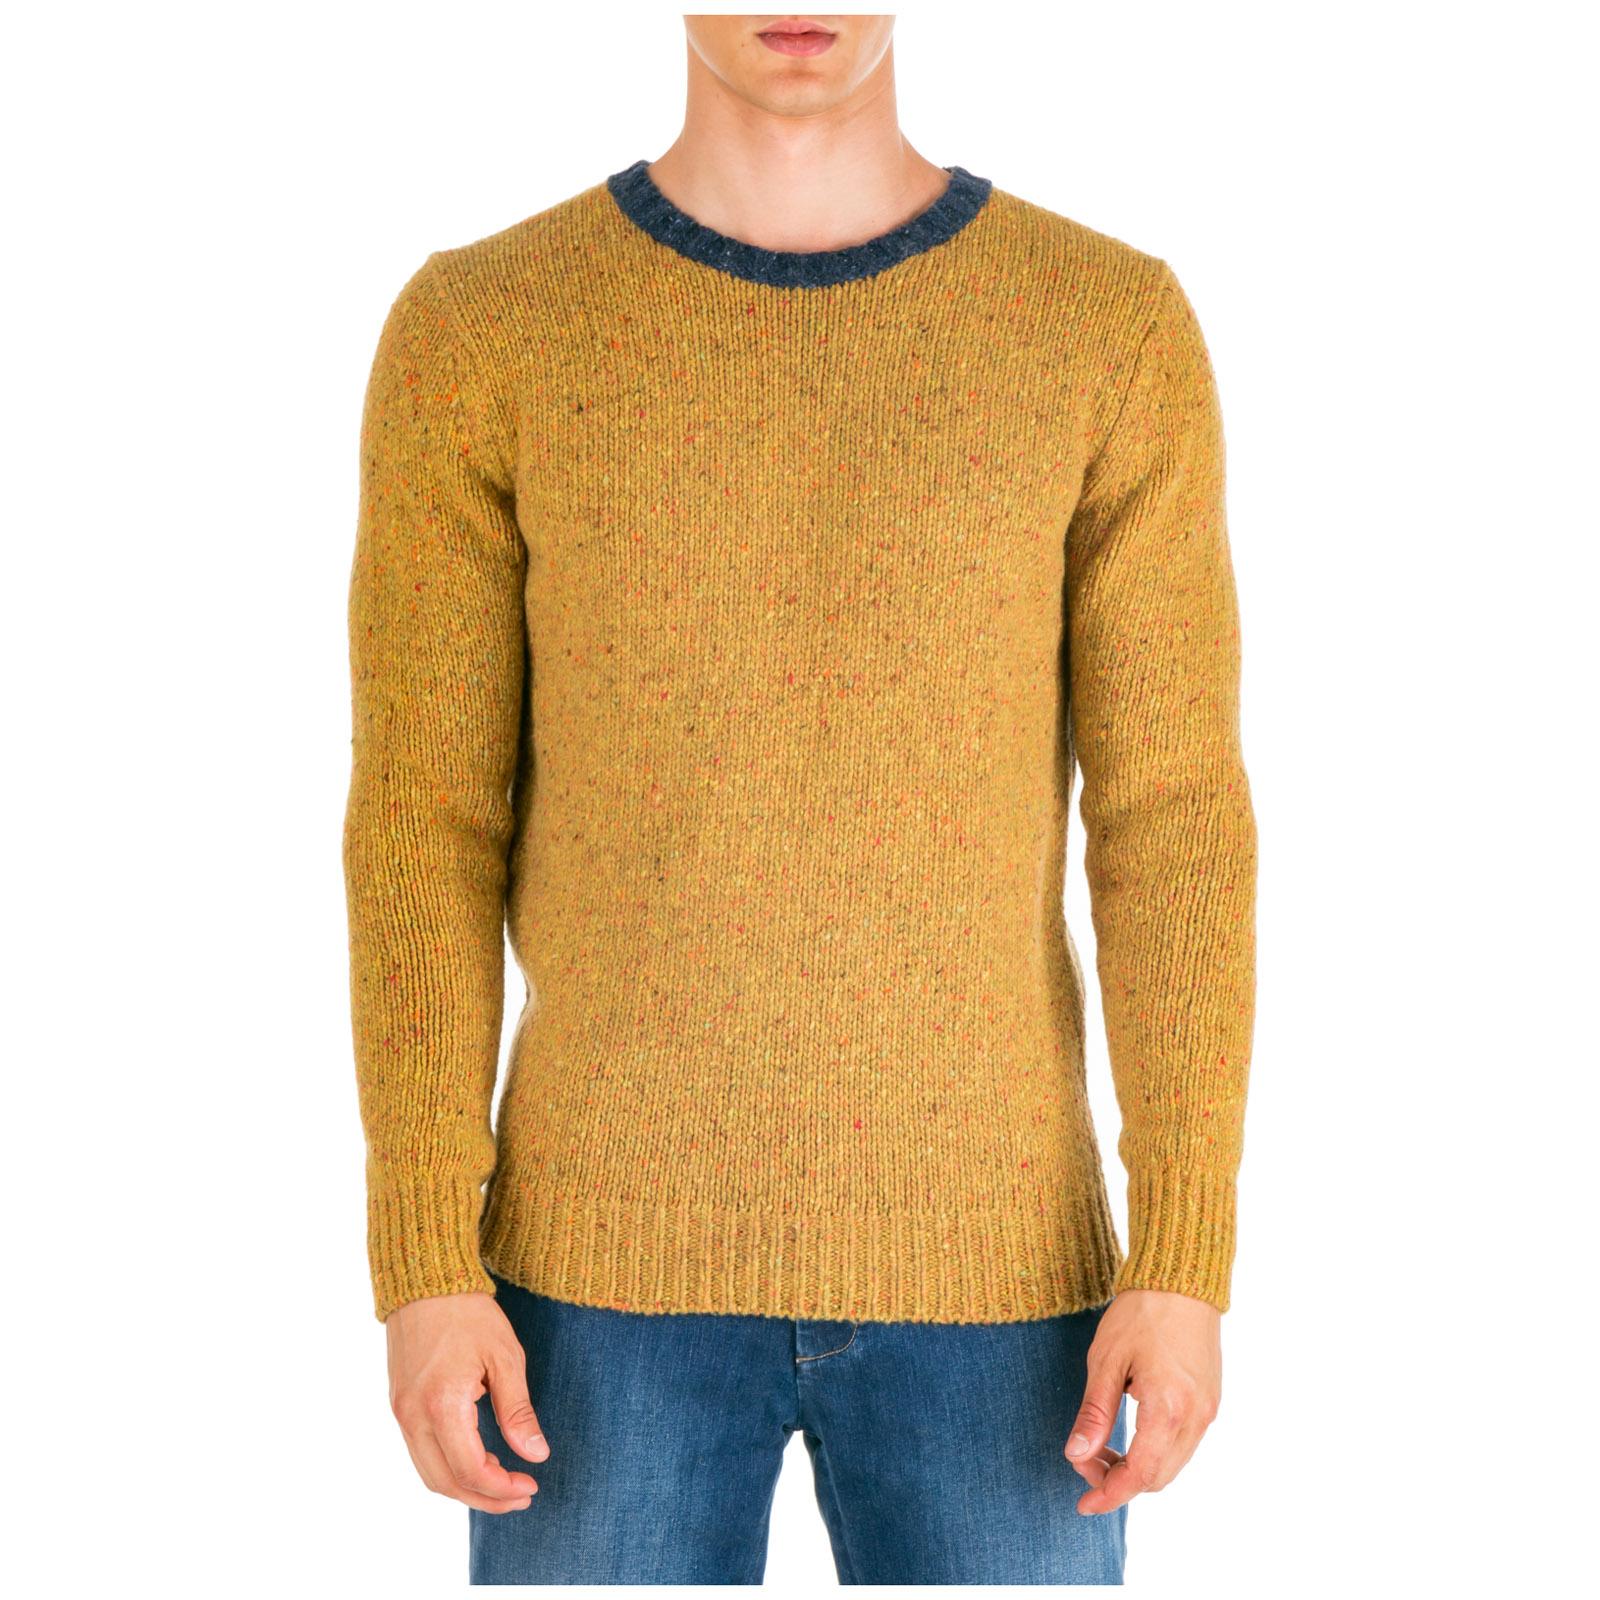 AT.P.CO Wool Men's Crew Neck Neckline Jumper Sweater Pullover in Yellow ...